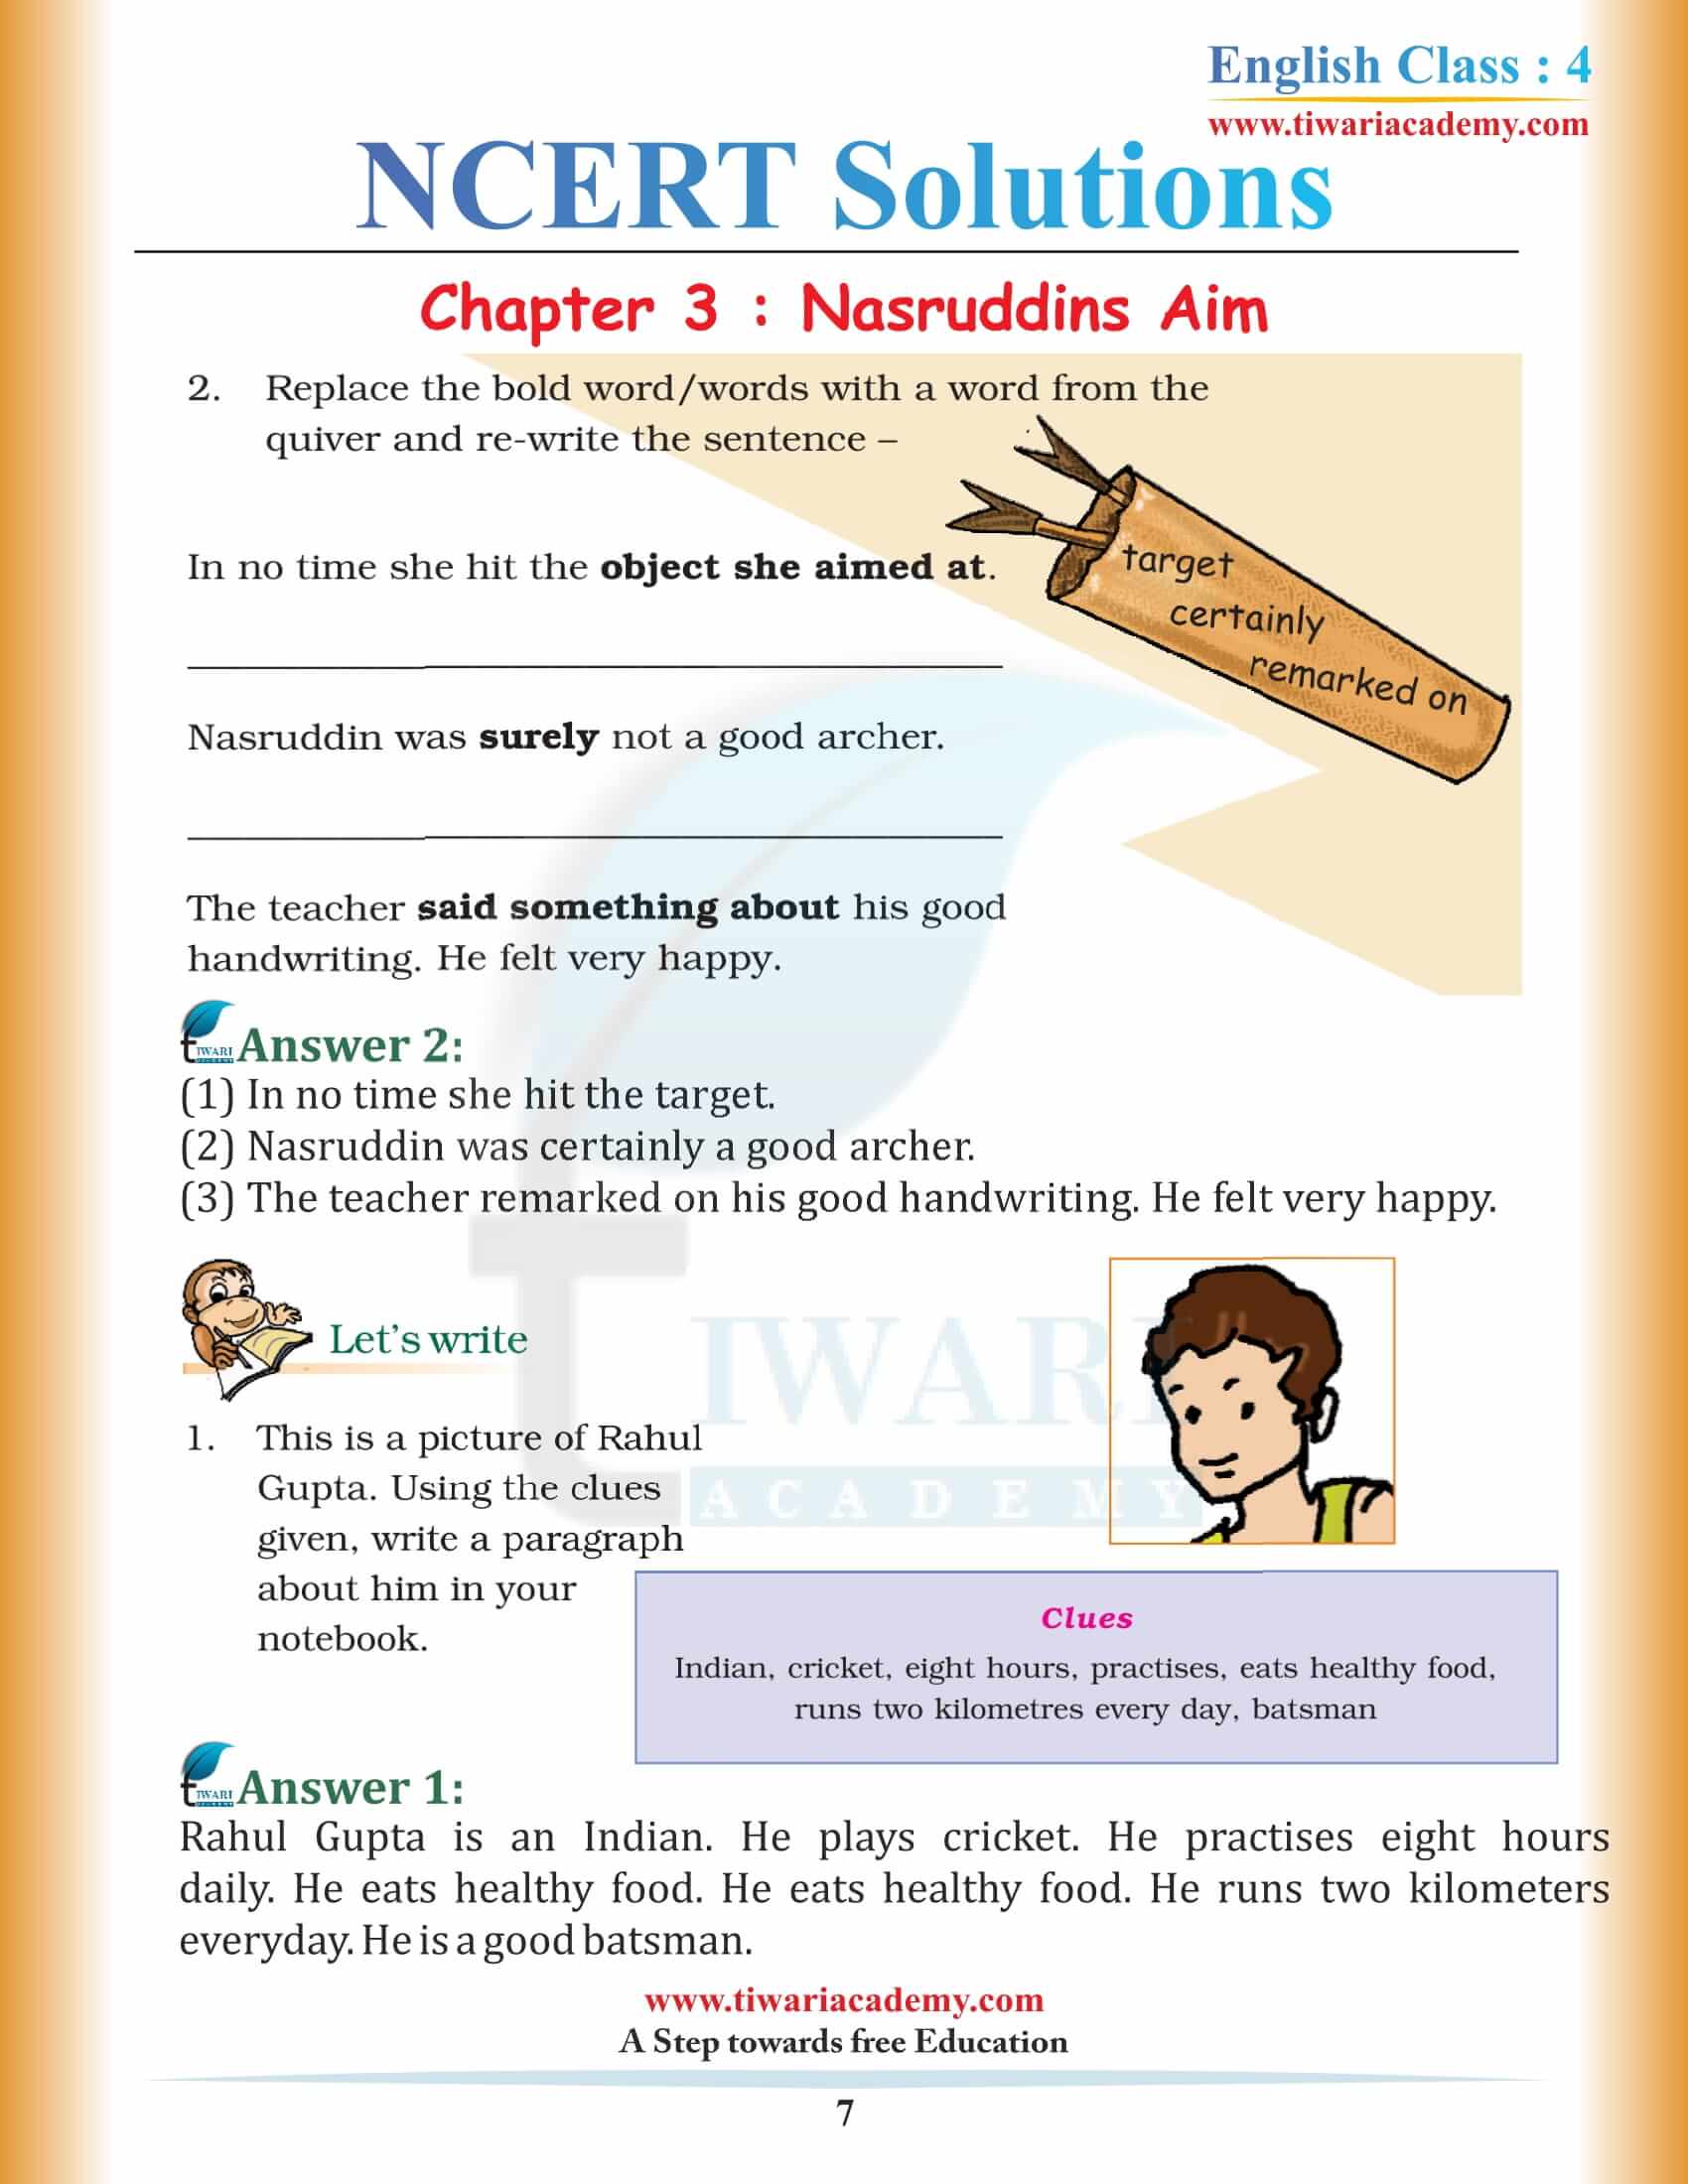 NCERT Solutions for Class 4 English Unit 3 in PDF